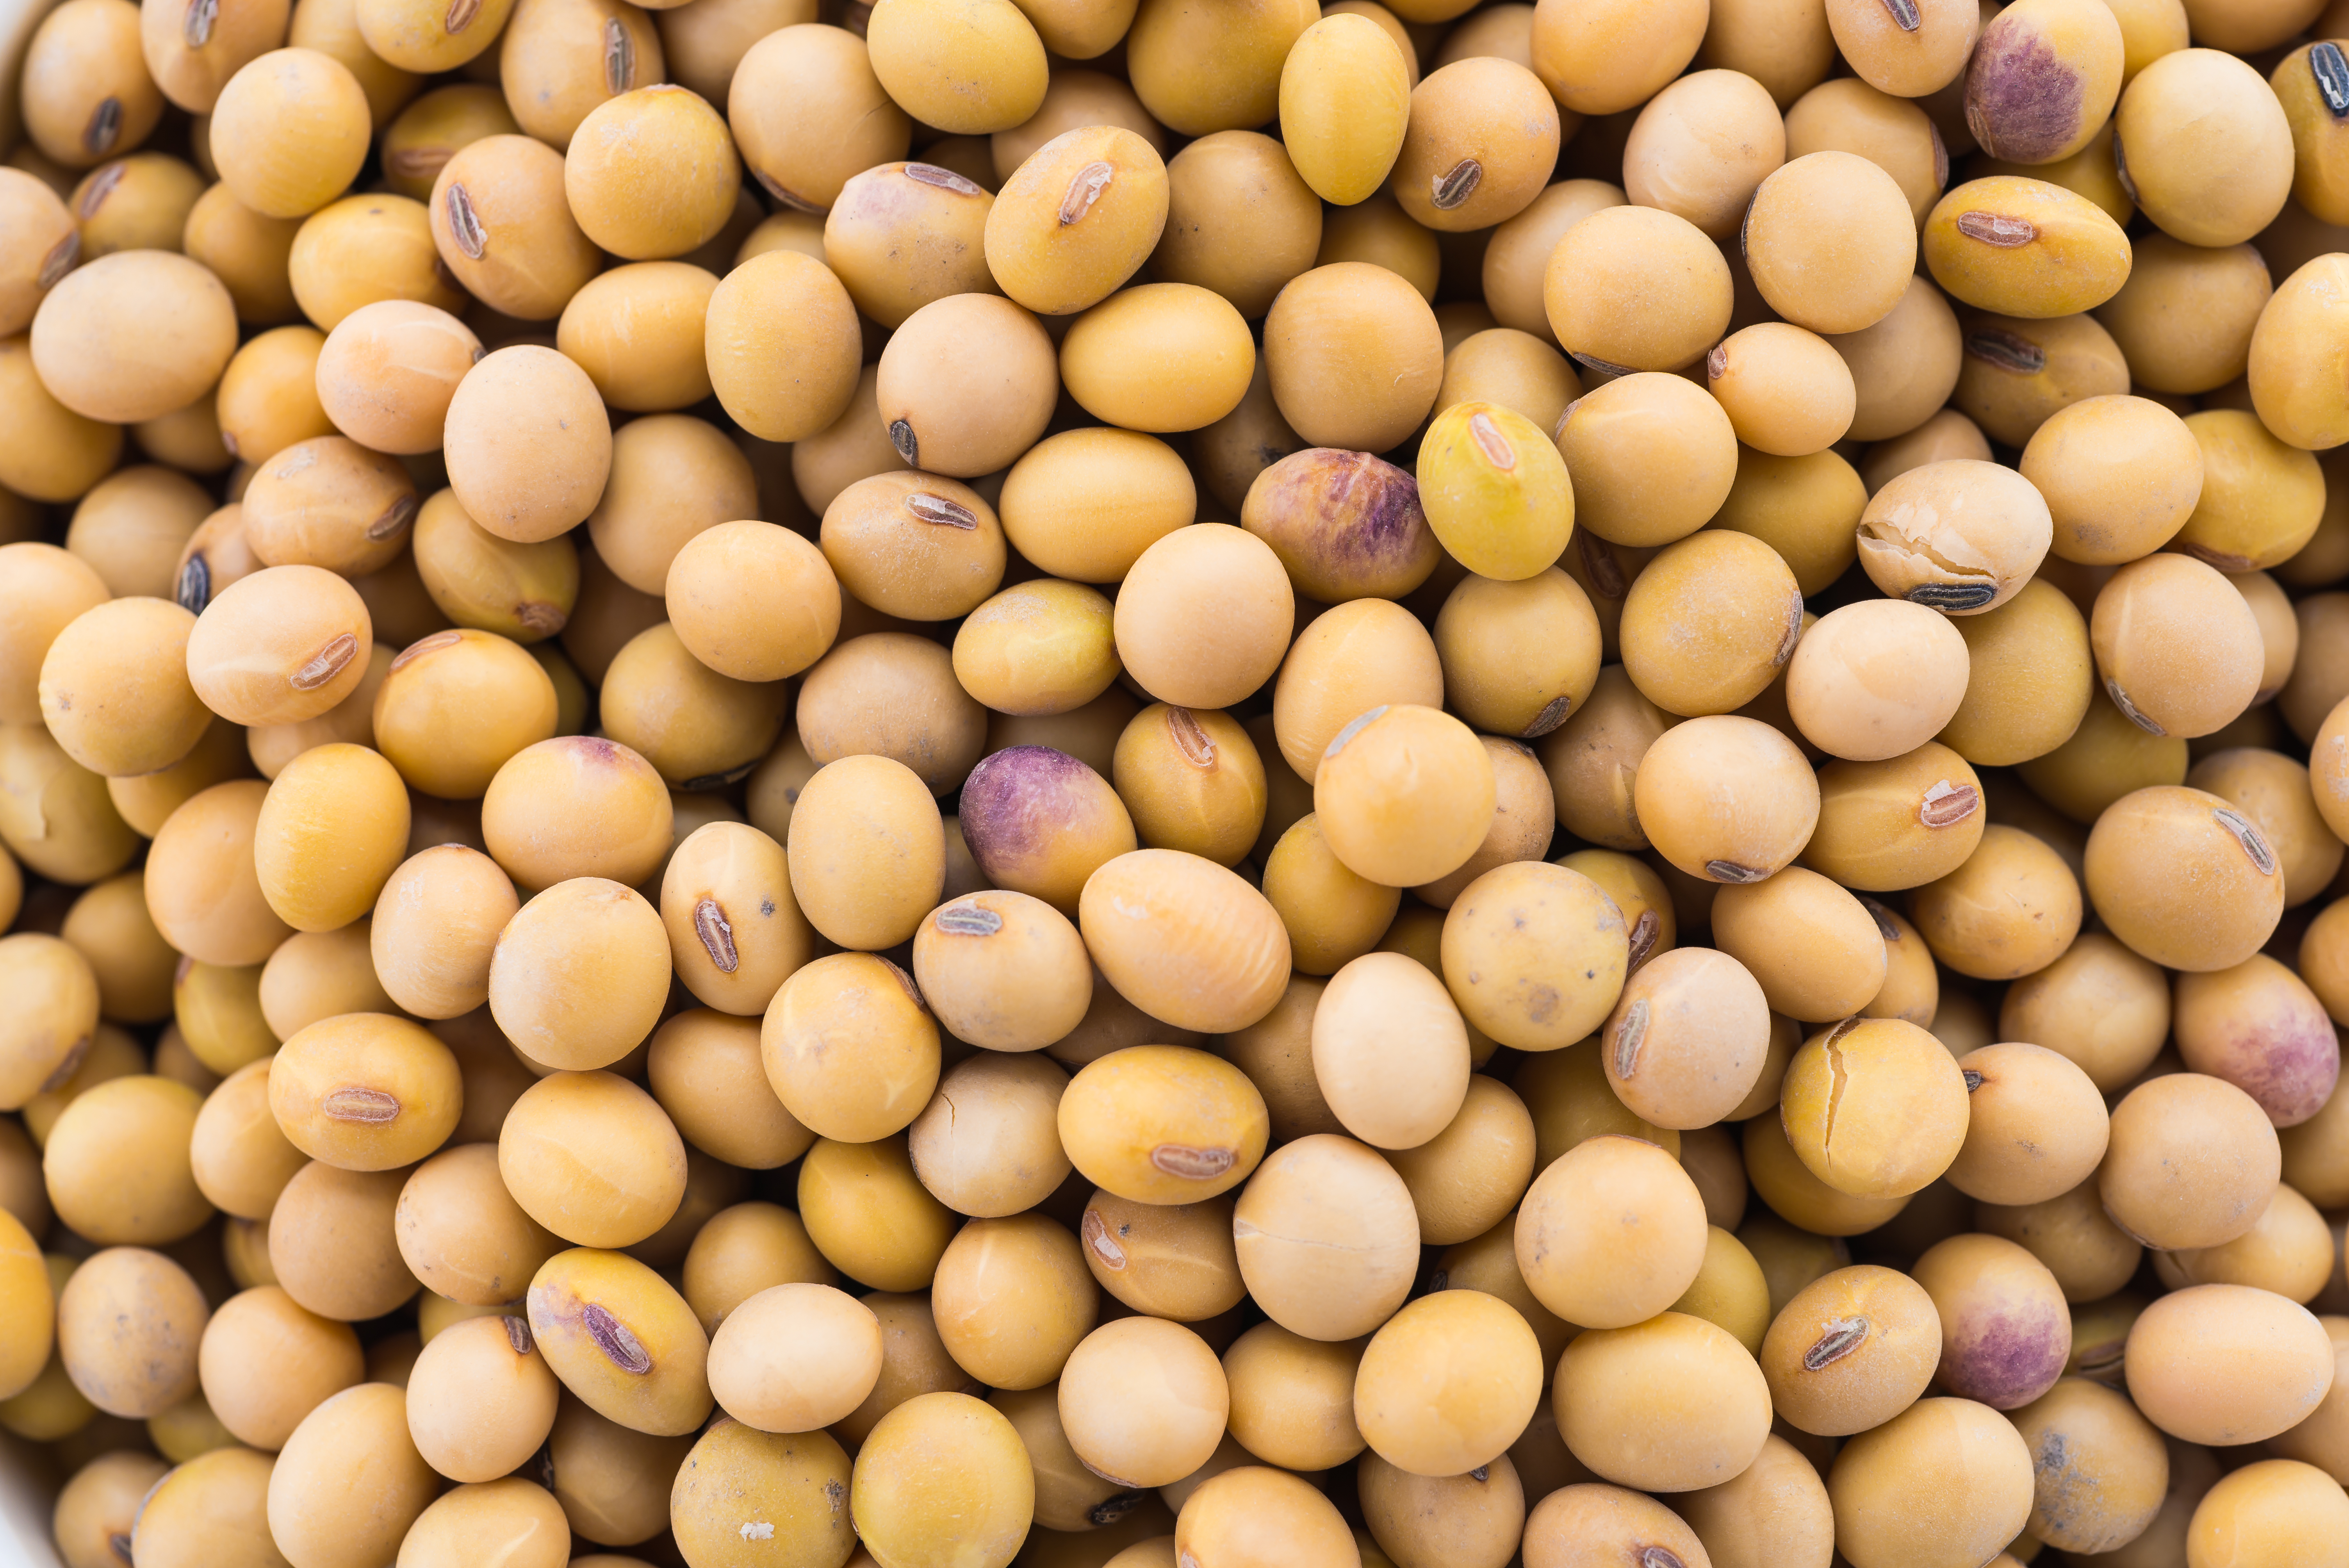 Soybeans: Every Child's Favorite Legume